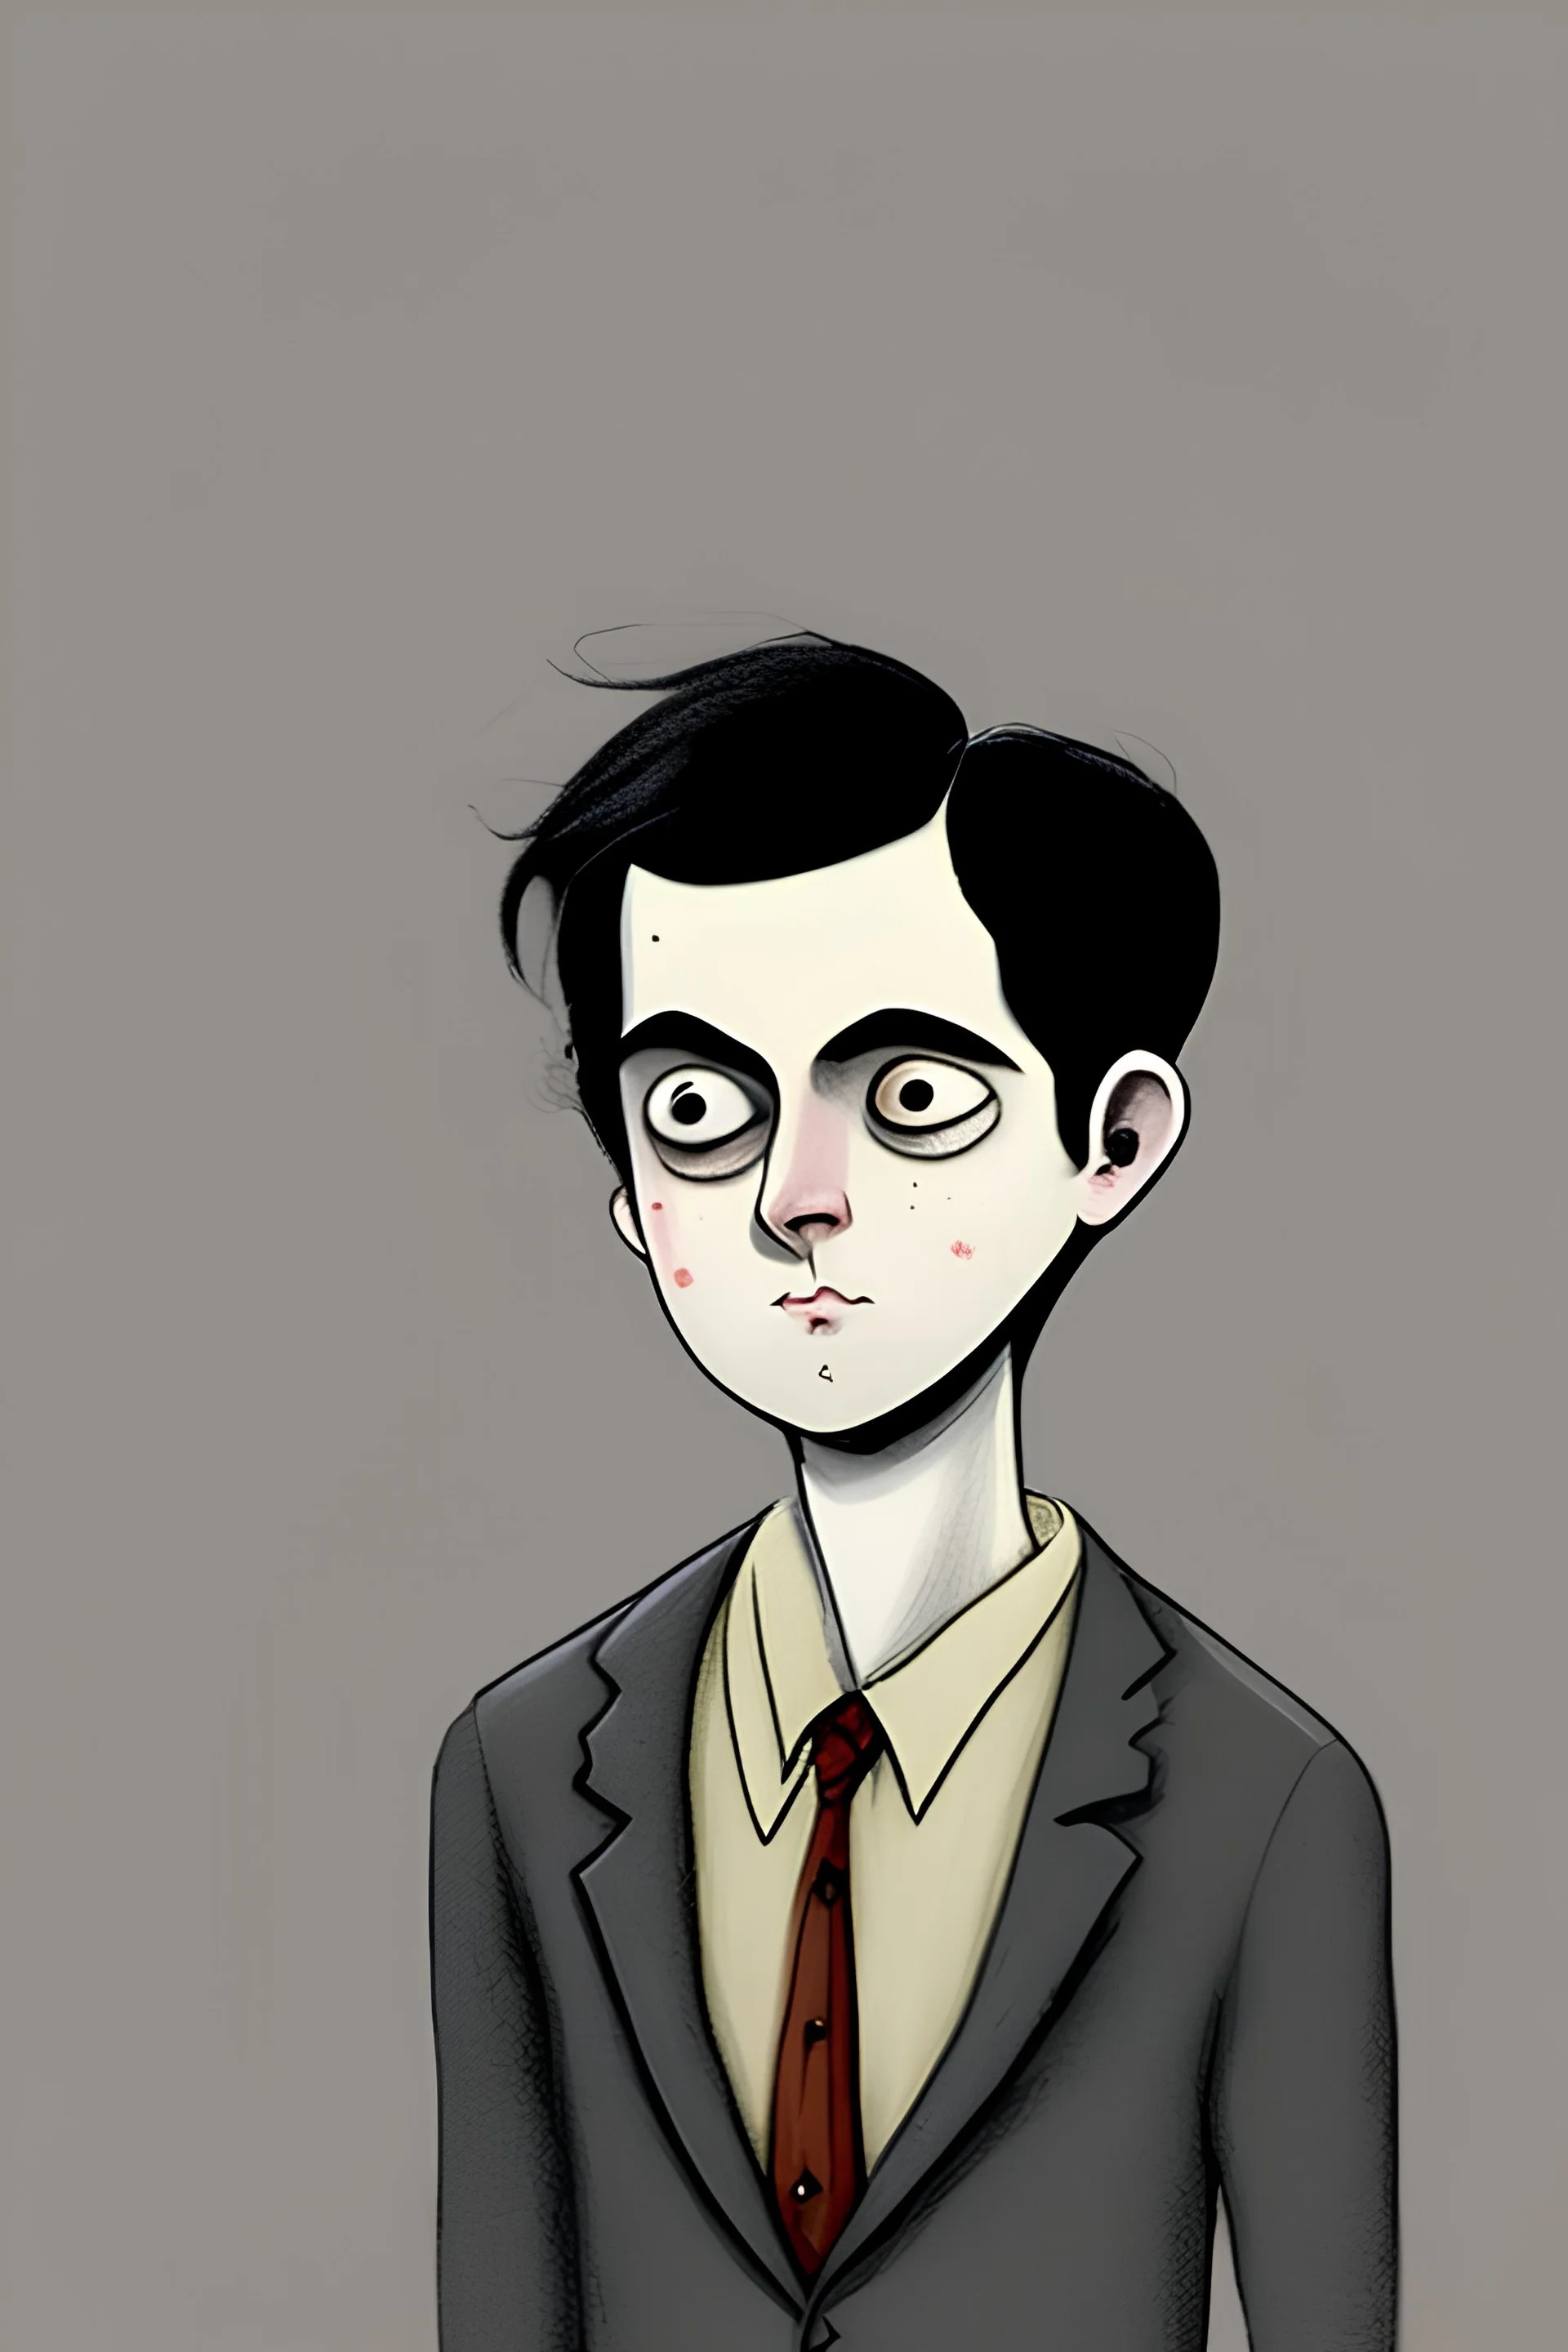 black haired young man wizard in the style of charles addams